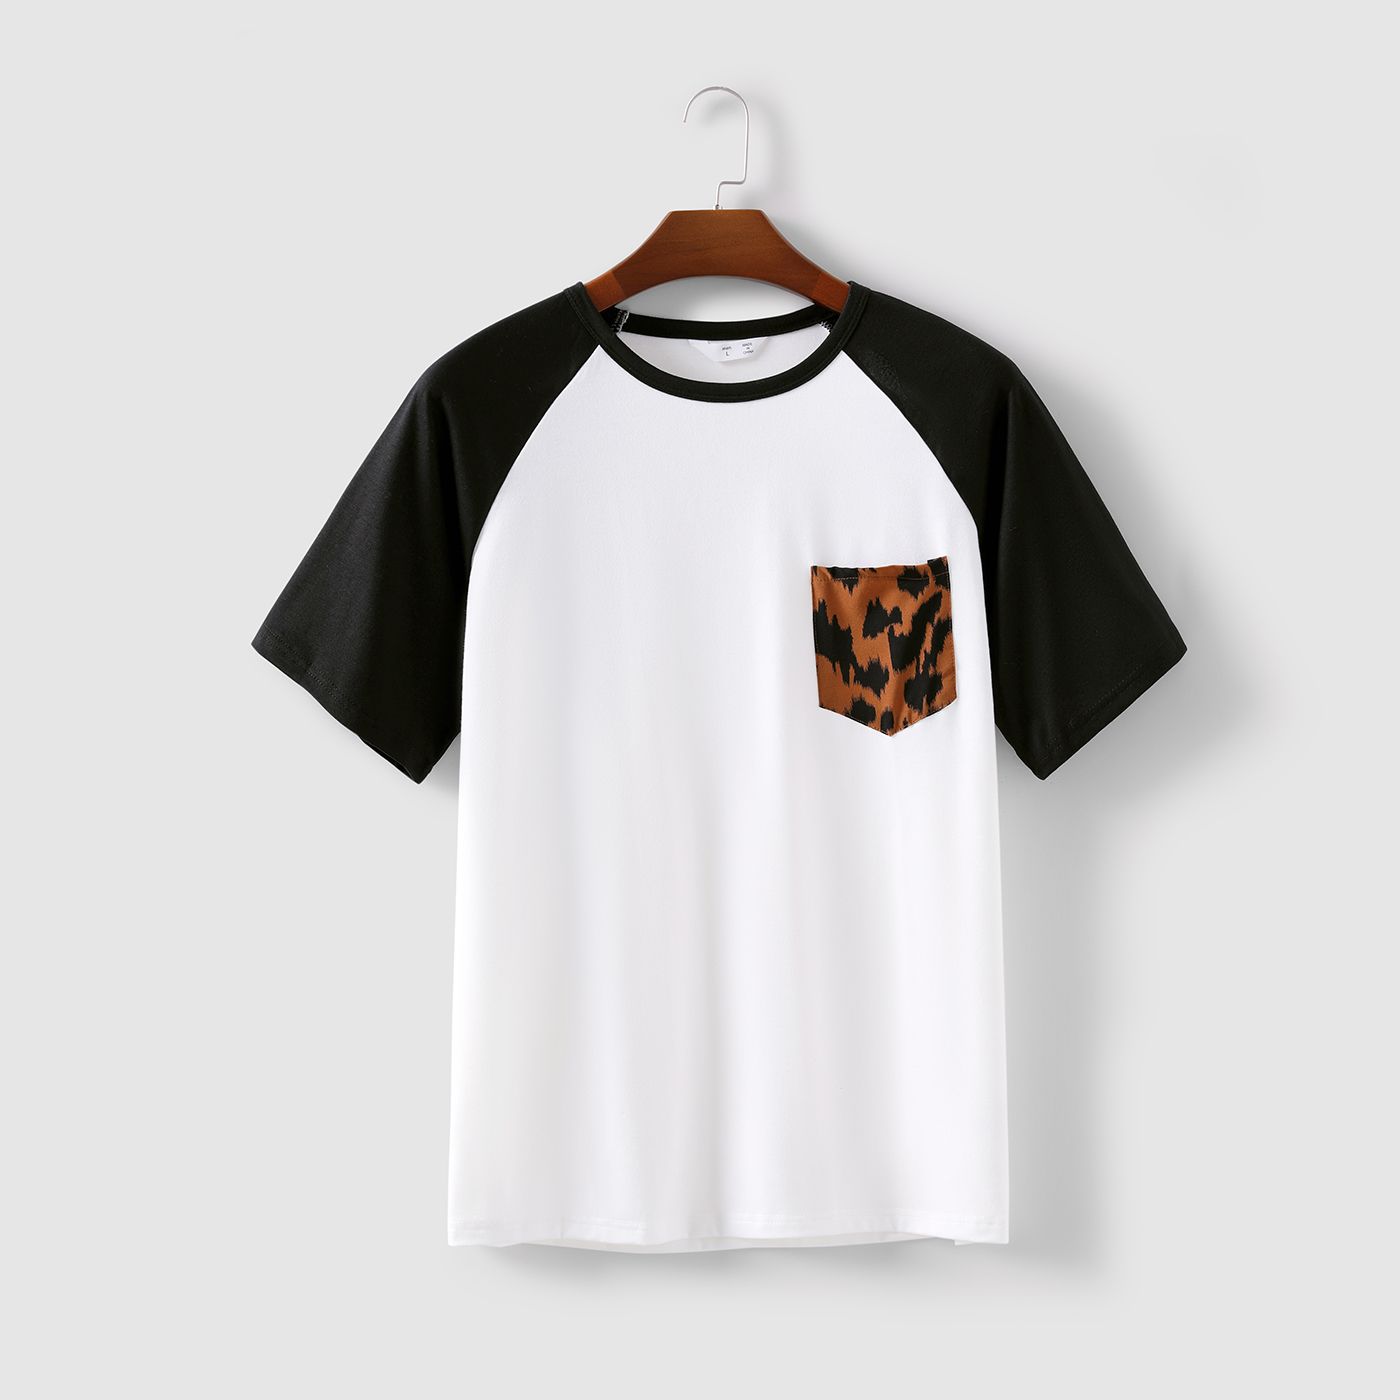 Family Matching Brown Leopard Halter Neck Sleeveless Belted Dresses And Raglan-sleeve T-shirts Sets